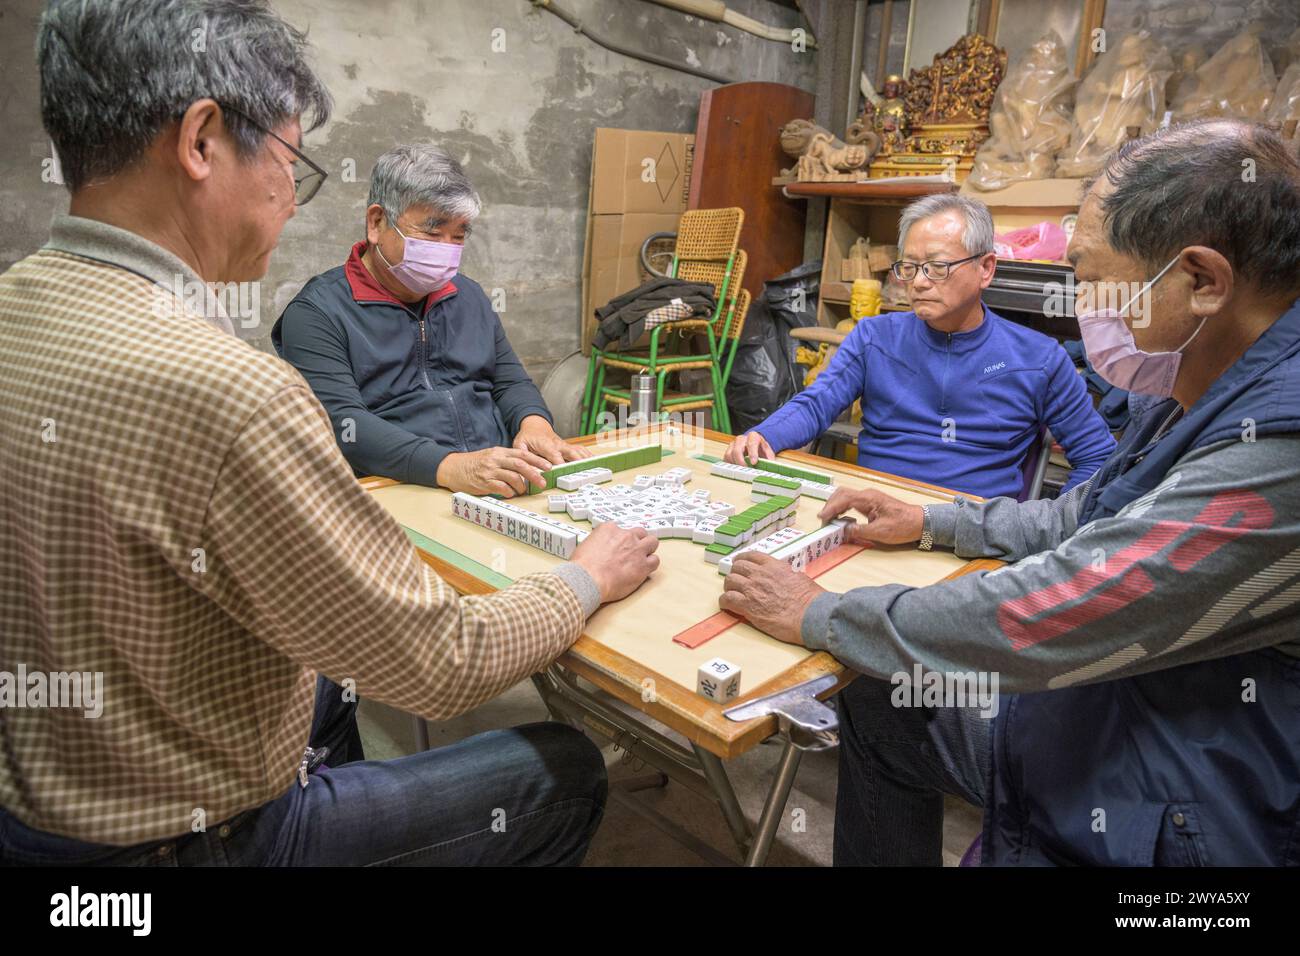 Group of men engaged in a mahjong game in a casual setting Stock Photo